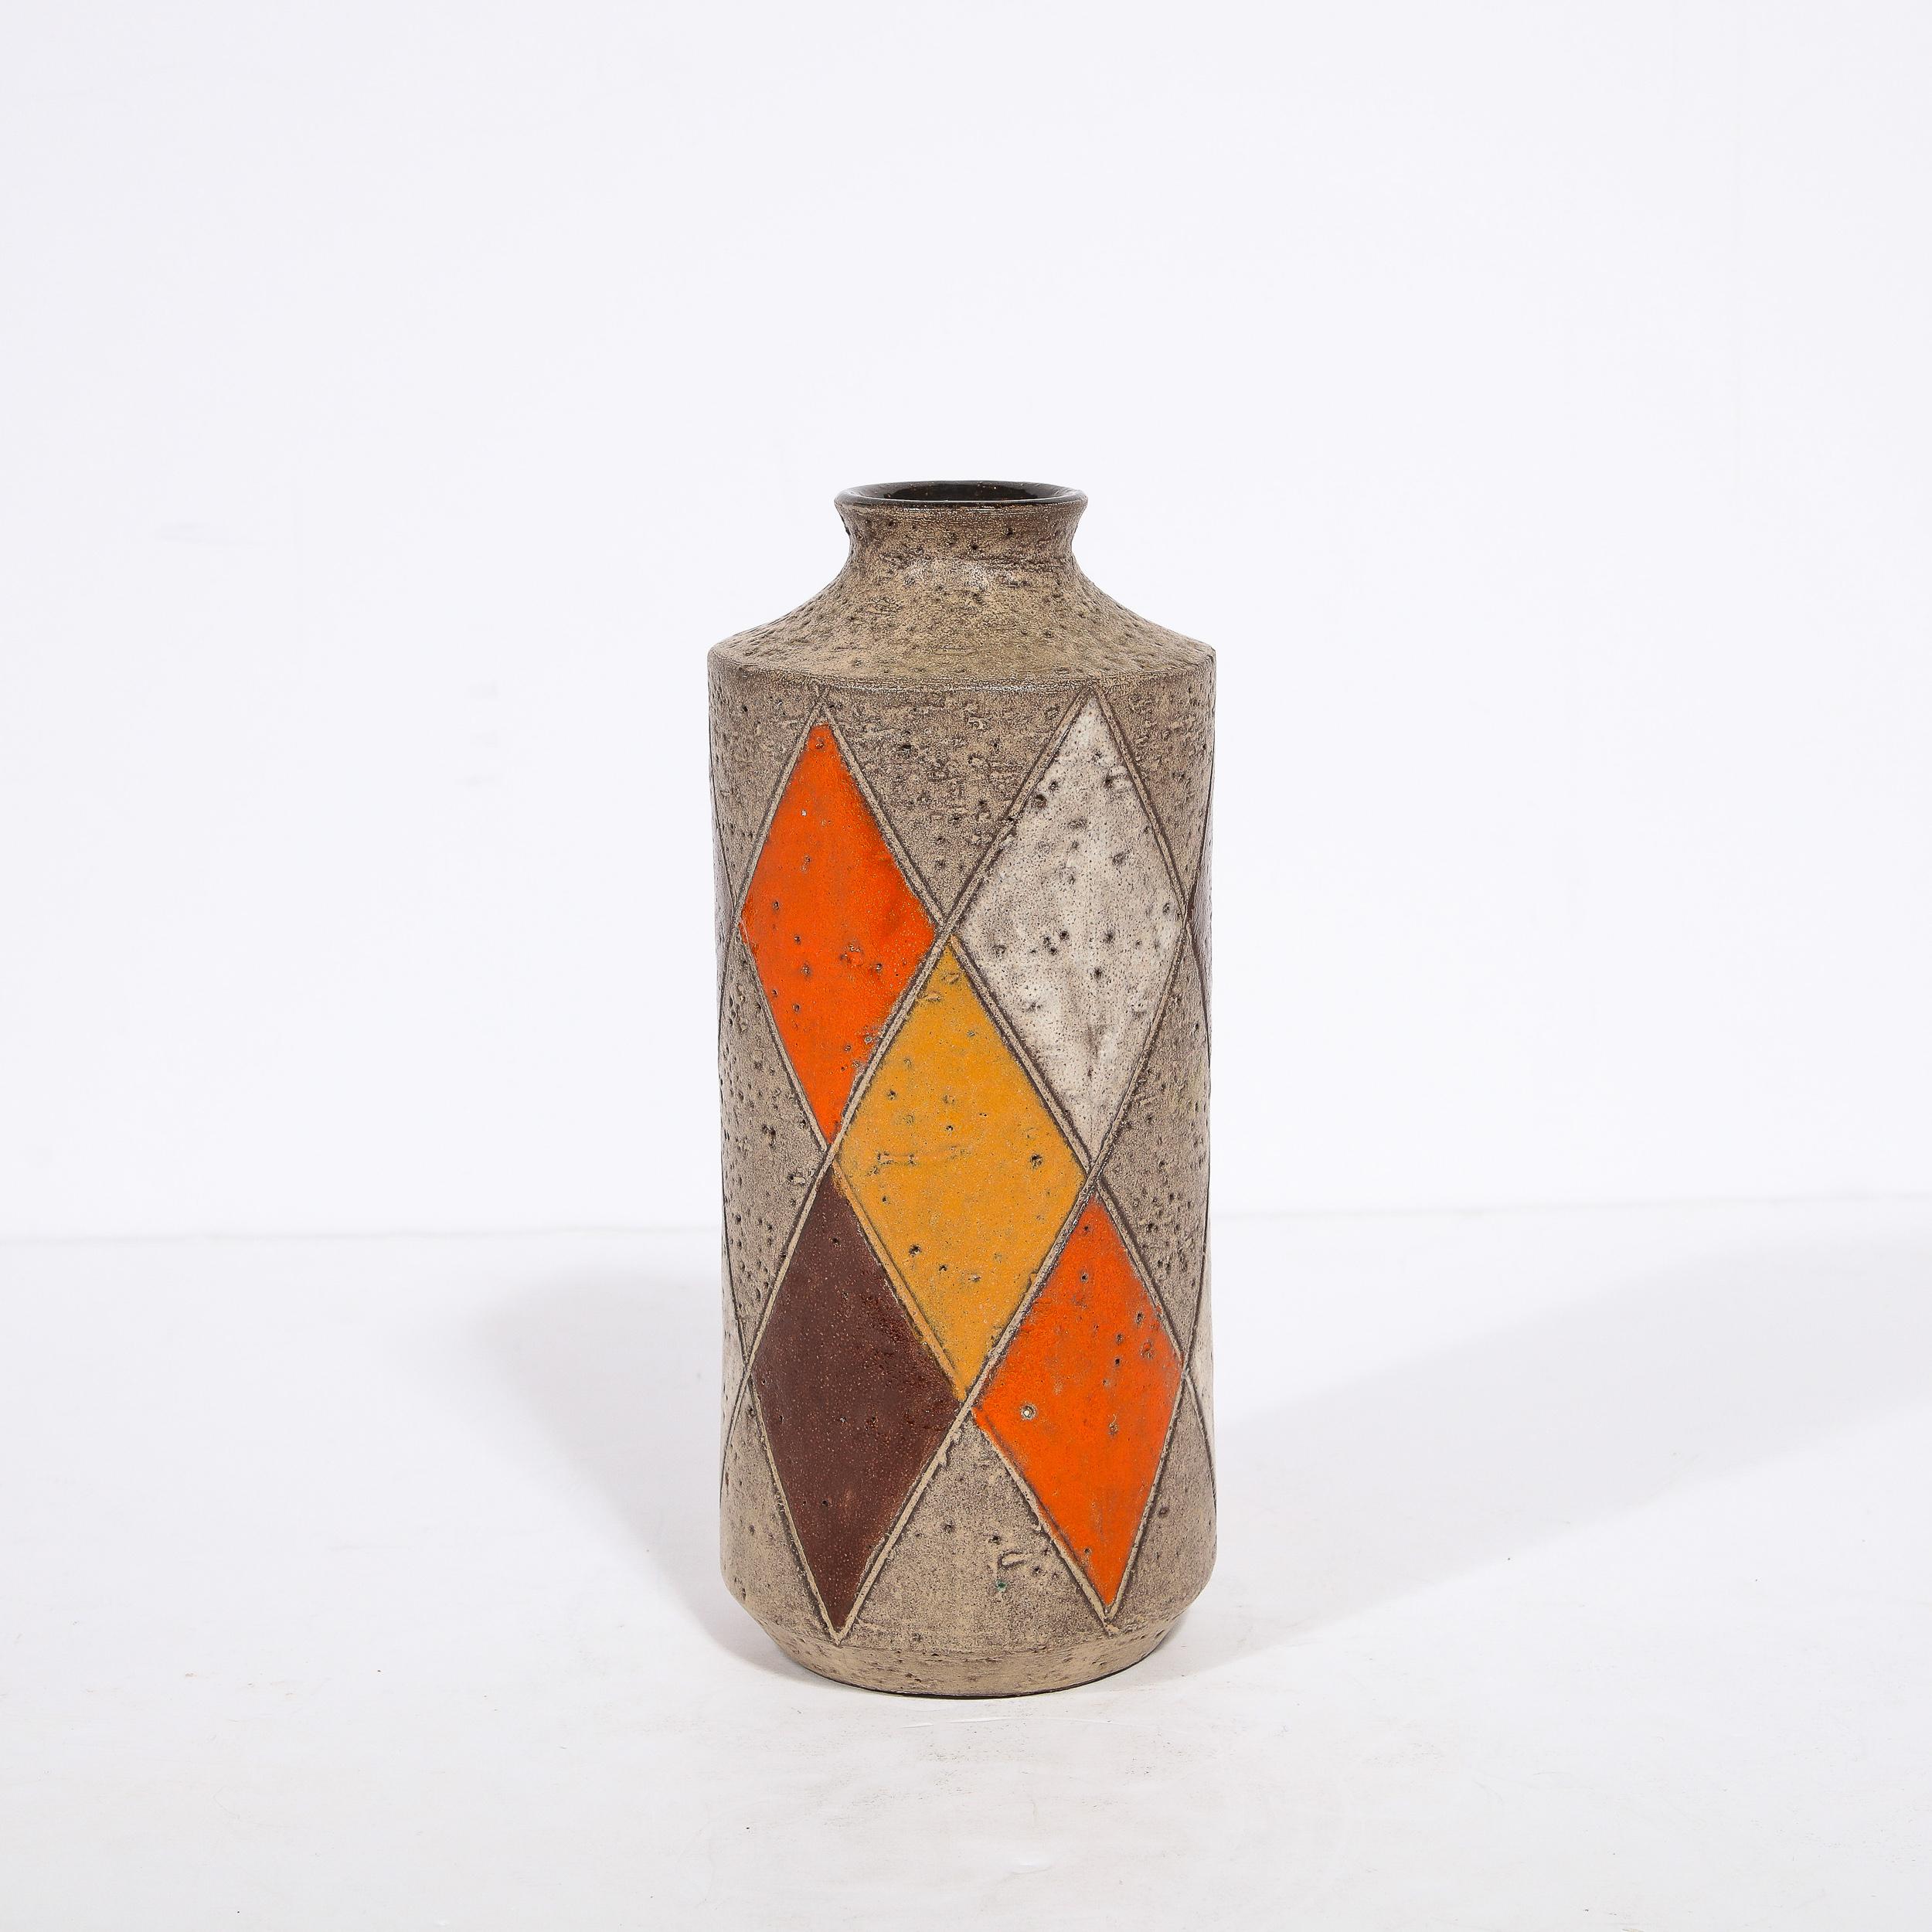 This refined Mid Century Modern ceramic vase was realized by the esteemed maker Thor in Denmark circa 1960. It offers a cylindrical body, and dramatically sloped shoulders that curve upwards to a truncated neck and round mouth- all in a beautiful